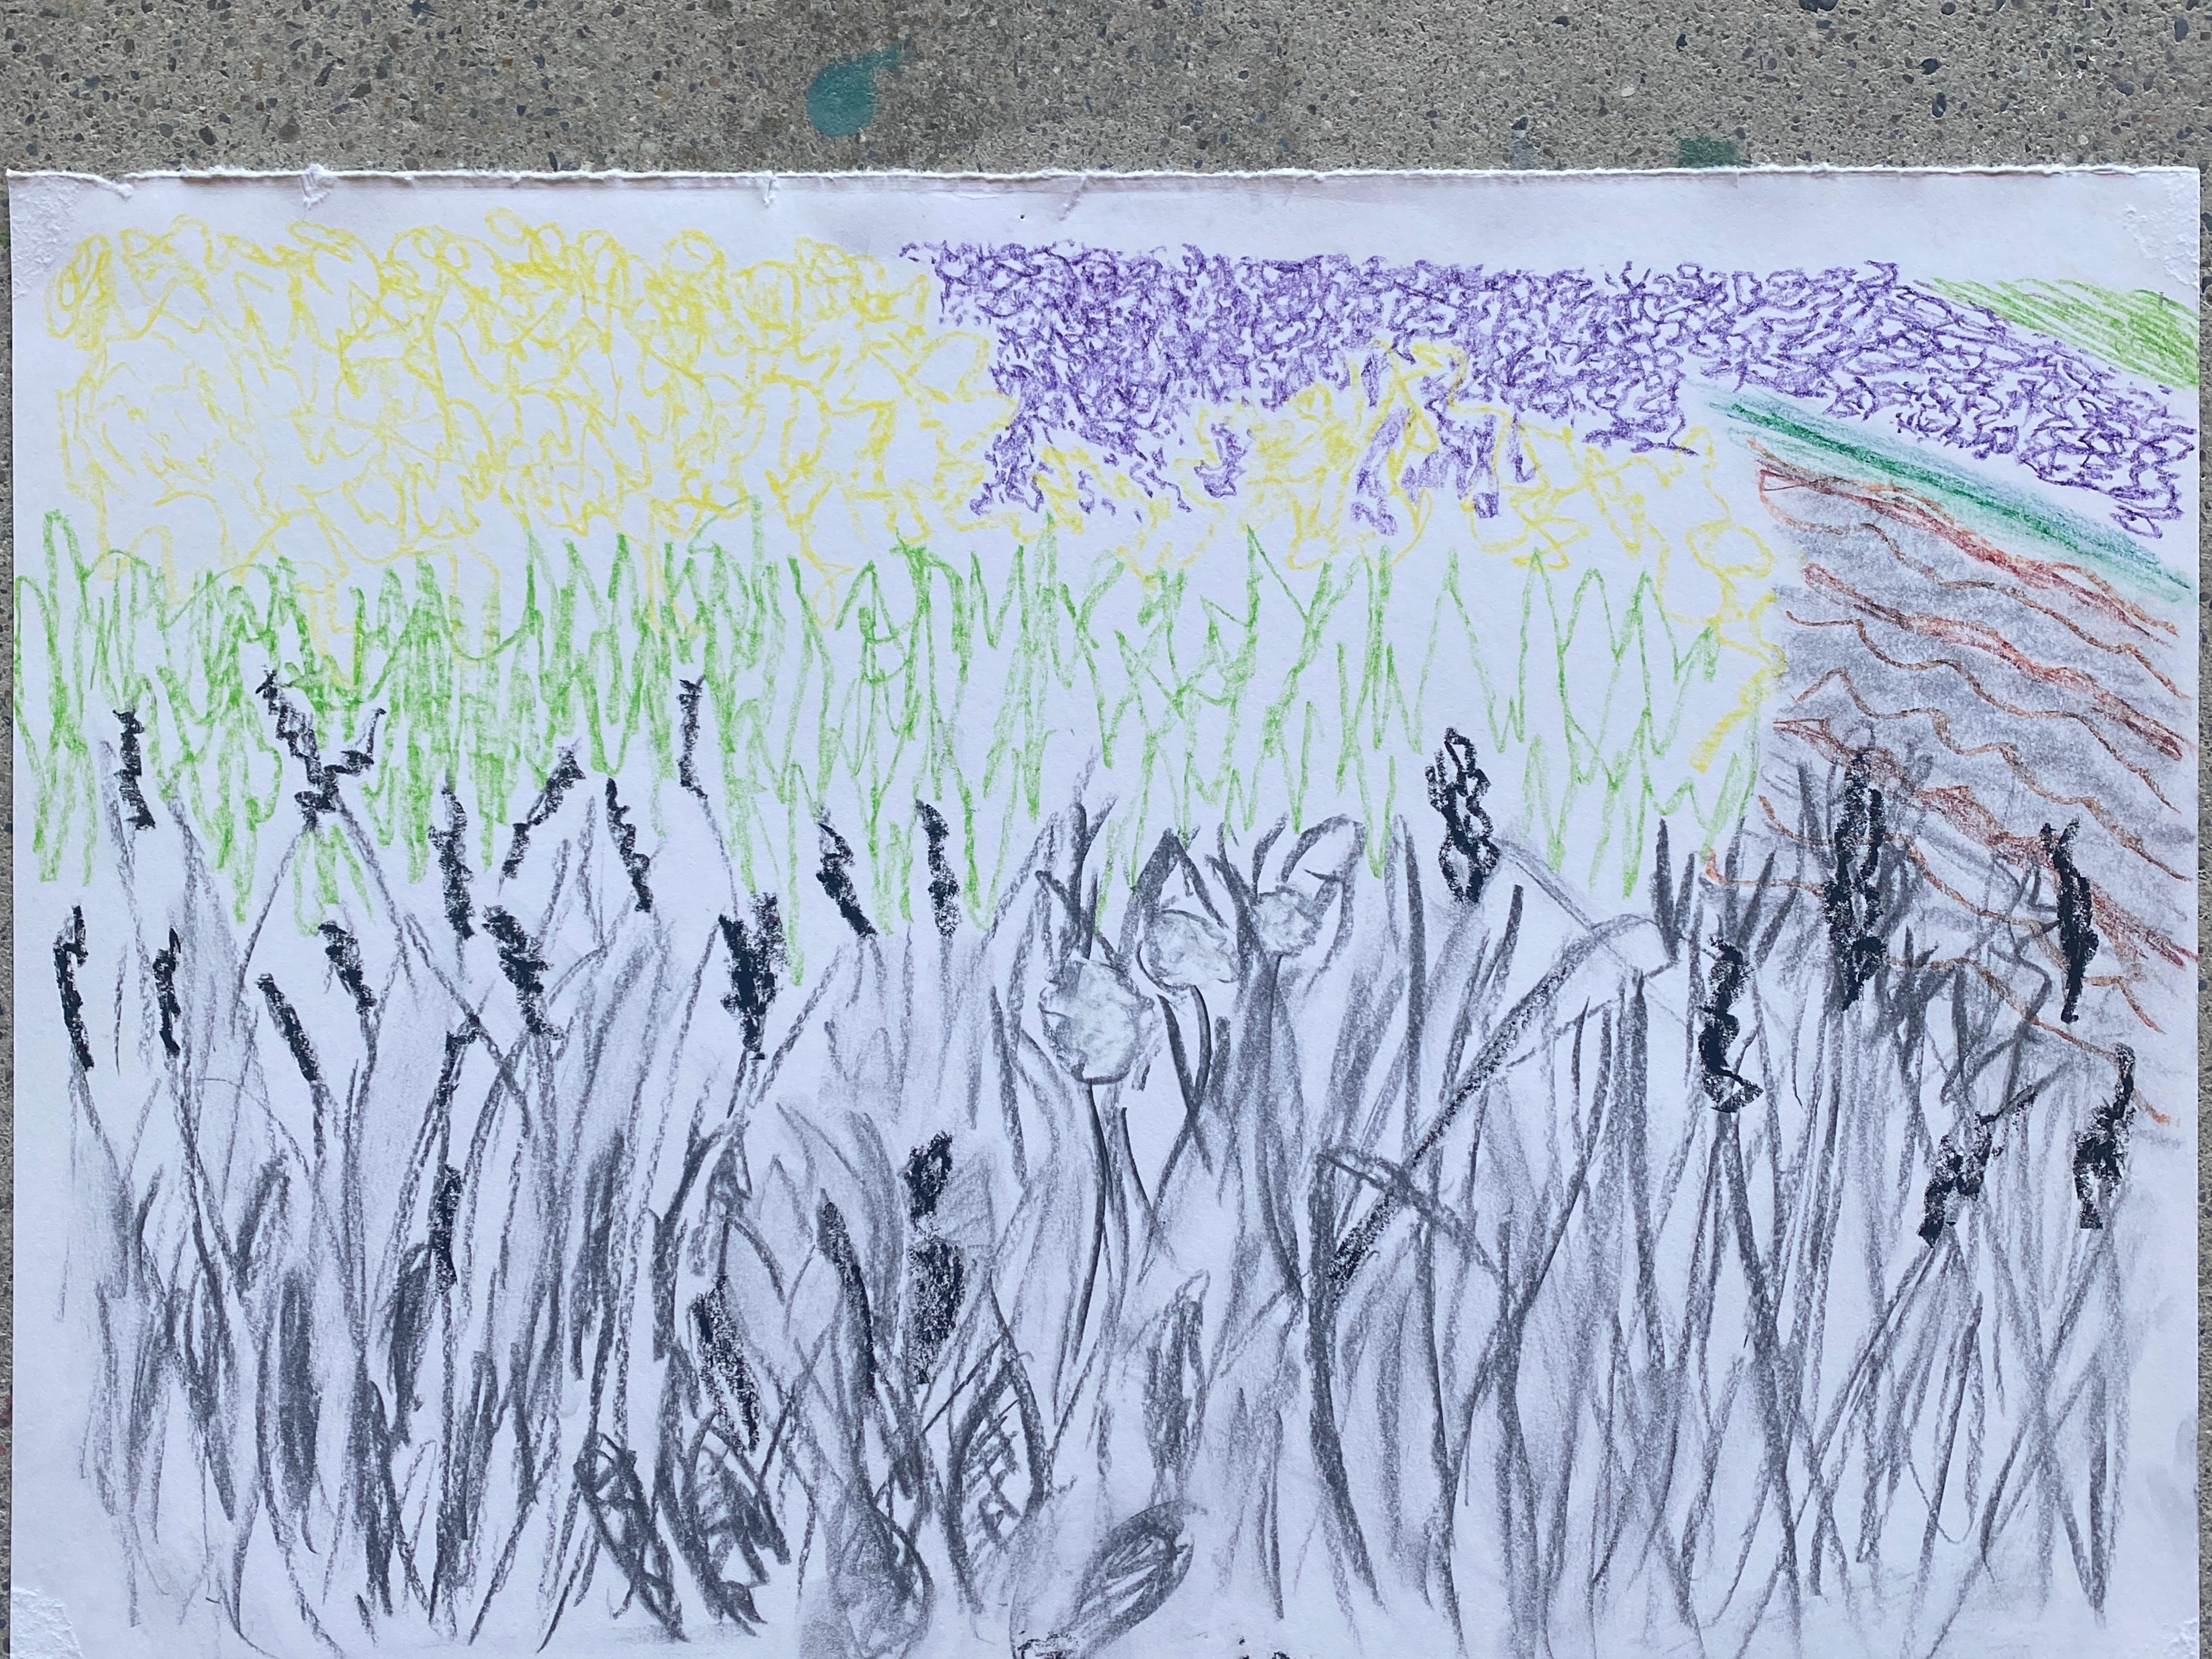 A hand-drawing using colour to show fields. The paper is lying on a concrete floor.